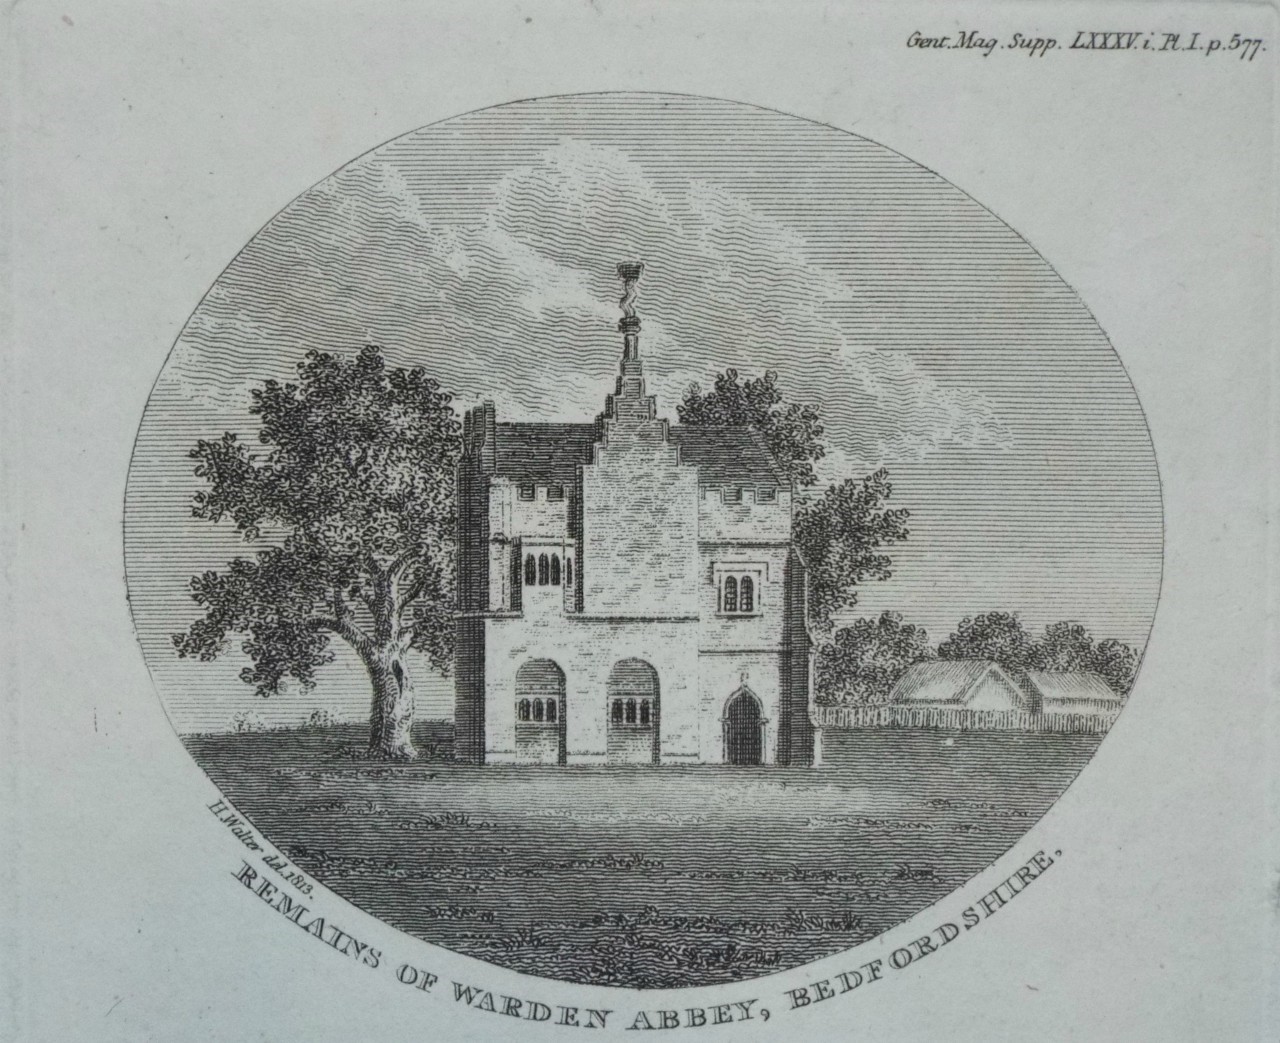 Print - Remains of Warden Abbey, Bedfordshire.